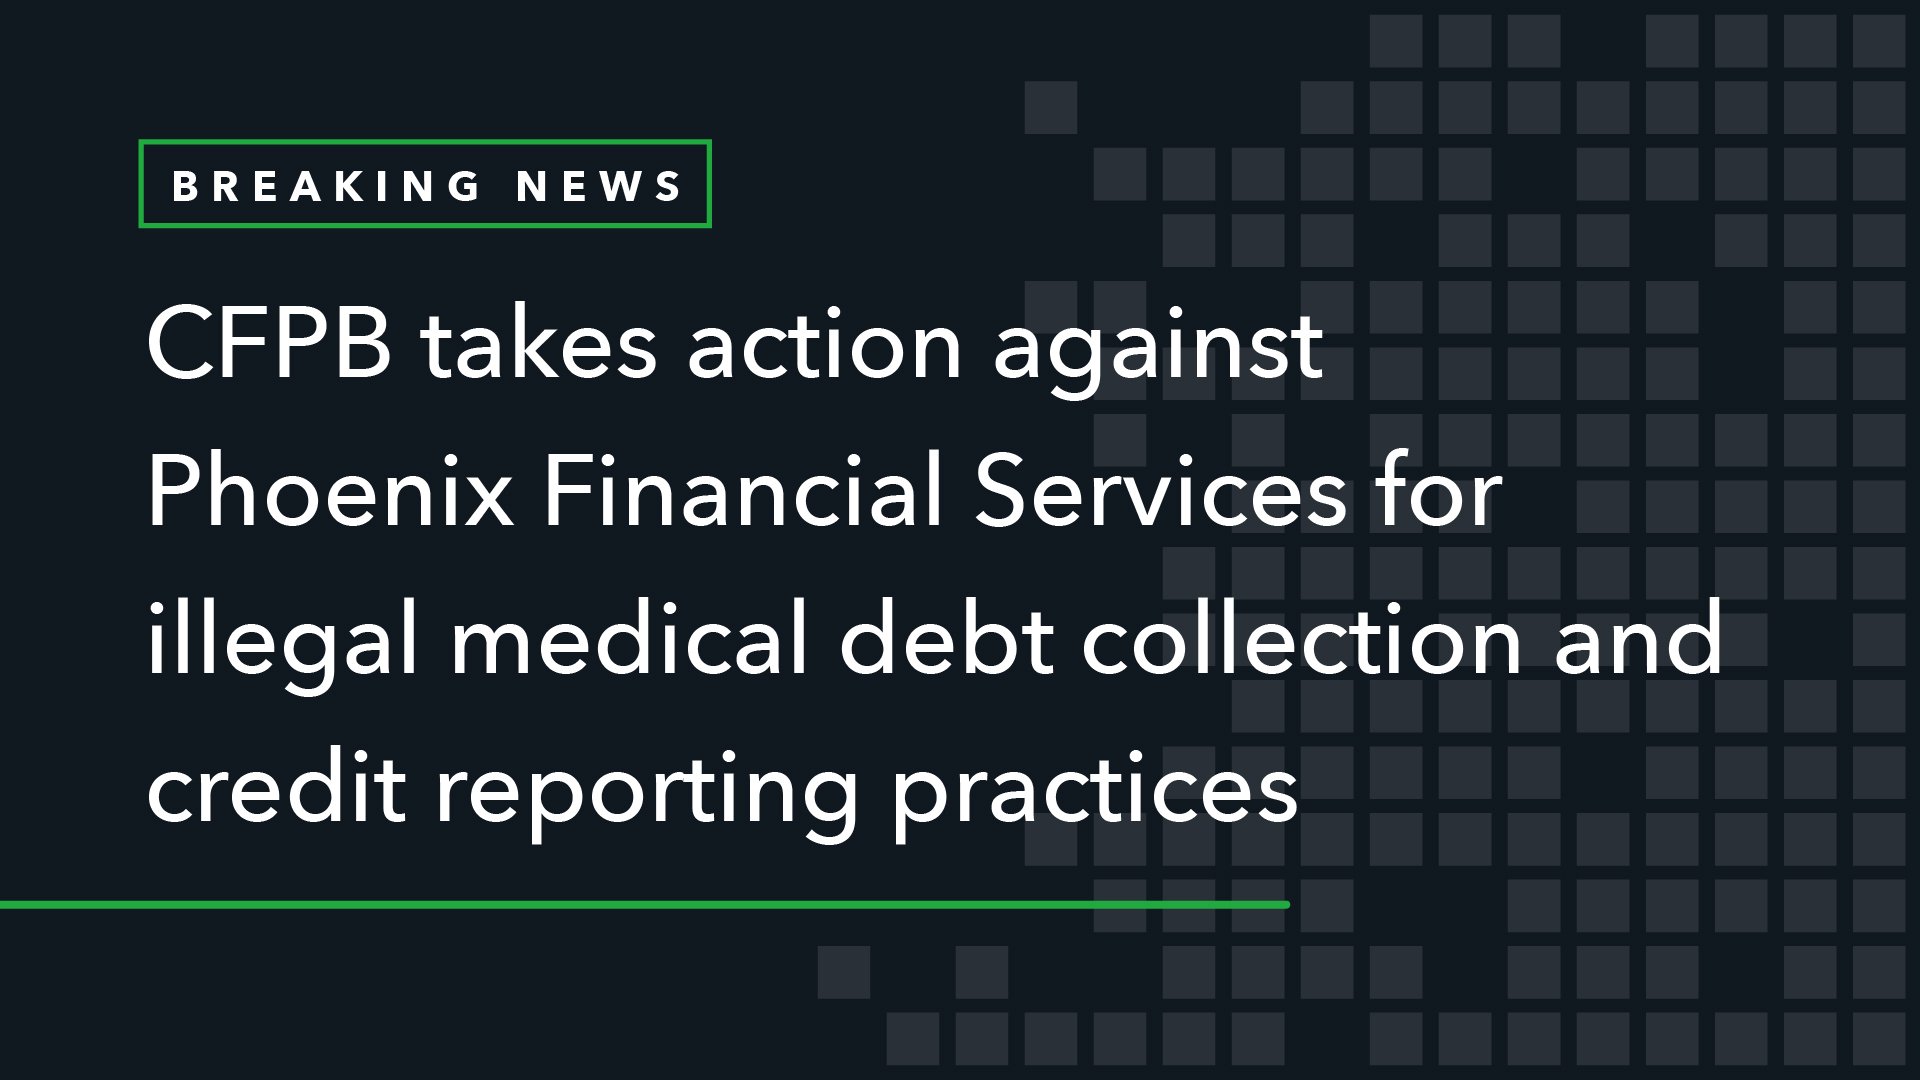 CFPB Takes Action Against Phoenix Financial Services for Illegal Medical Debt Collection and Credit Reporting Practices